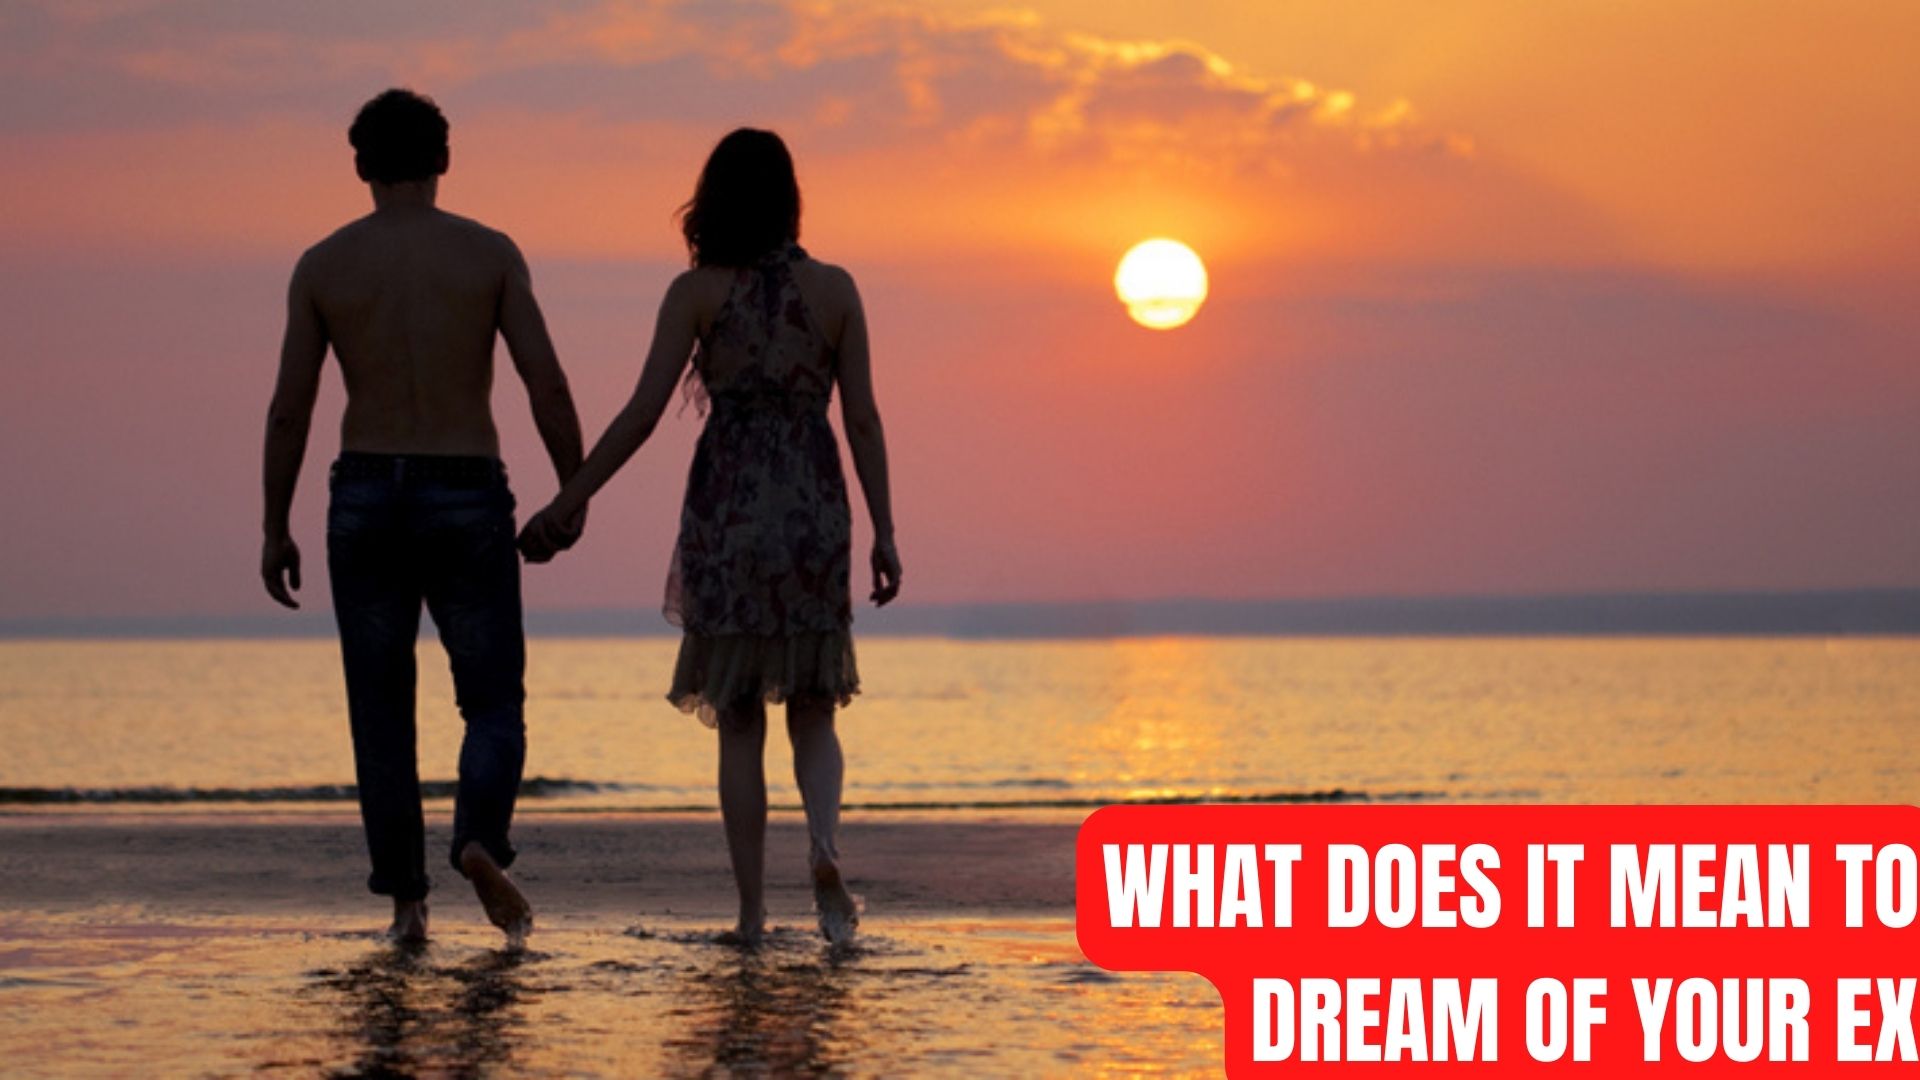 What Does It Mean To Dream Of Your Ex?